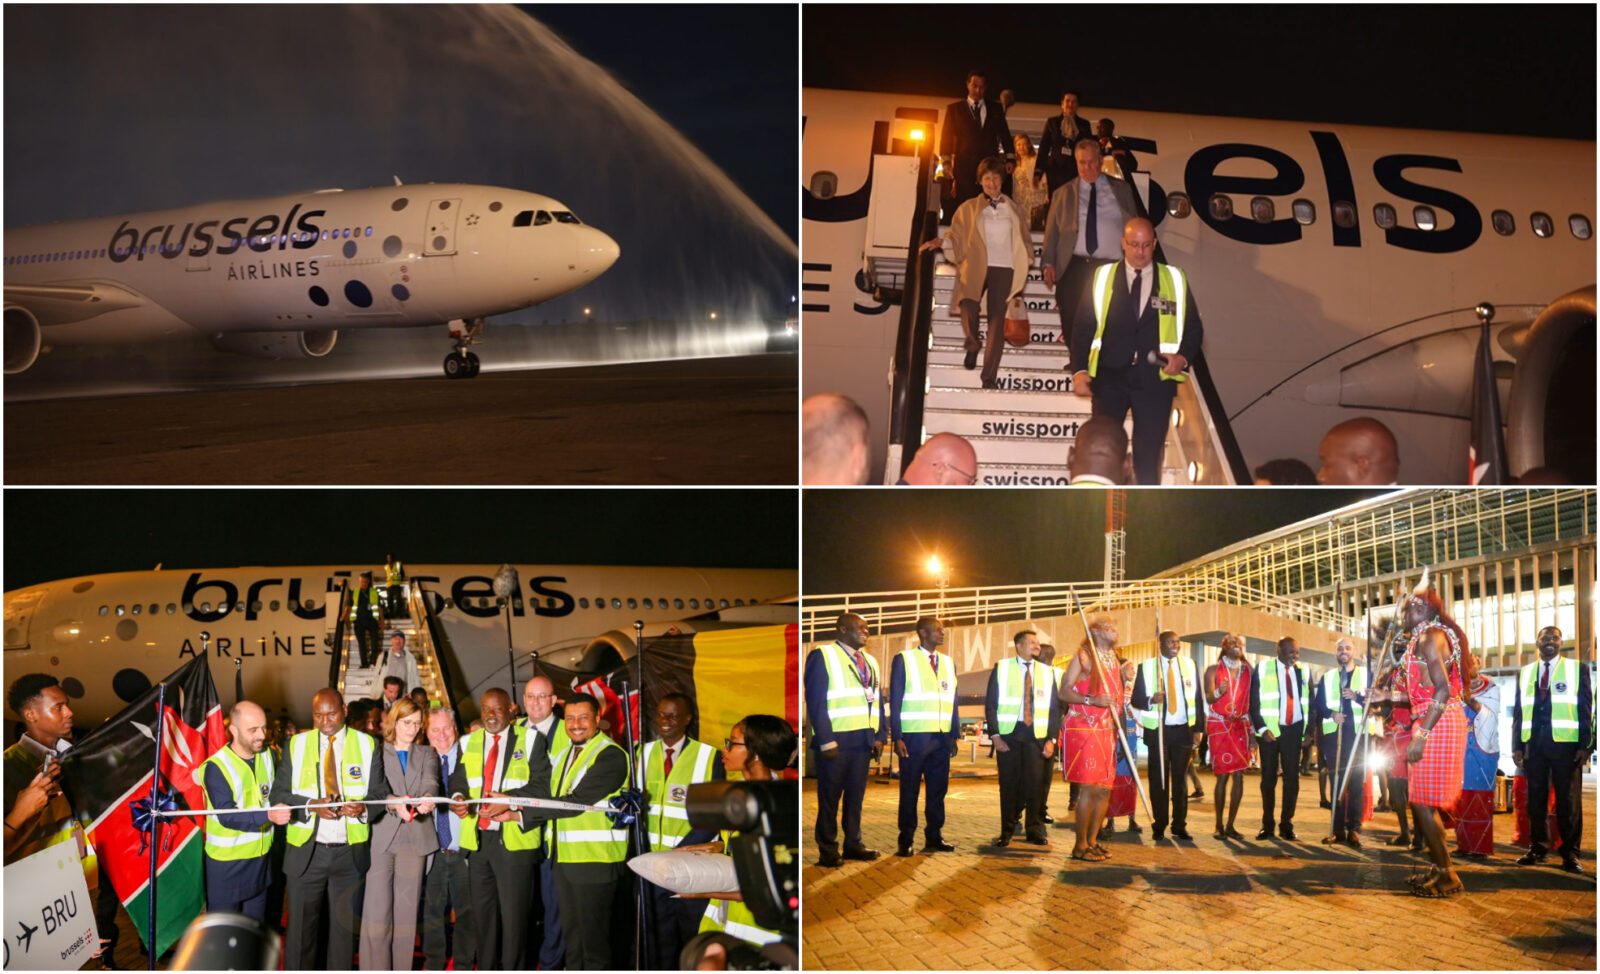 Brussels Airline resumes direct flights to Nairobi after 9-year break